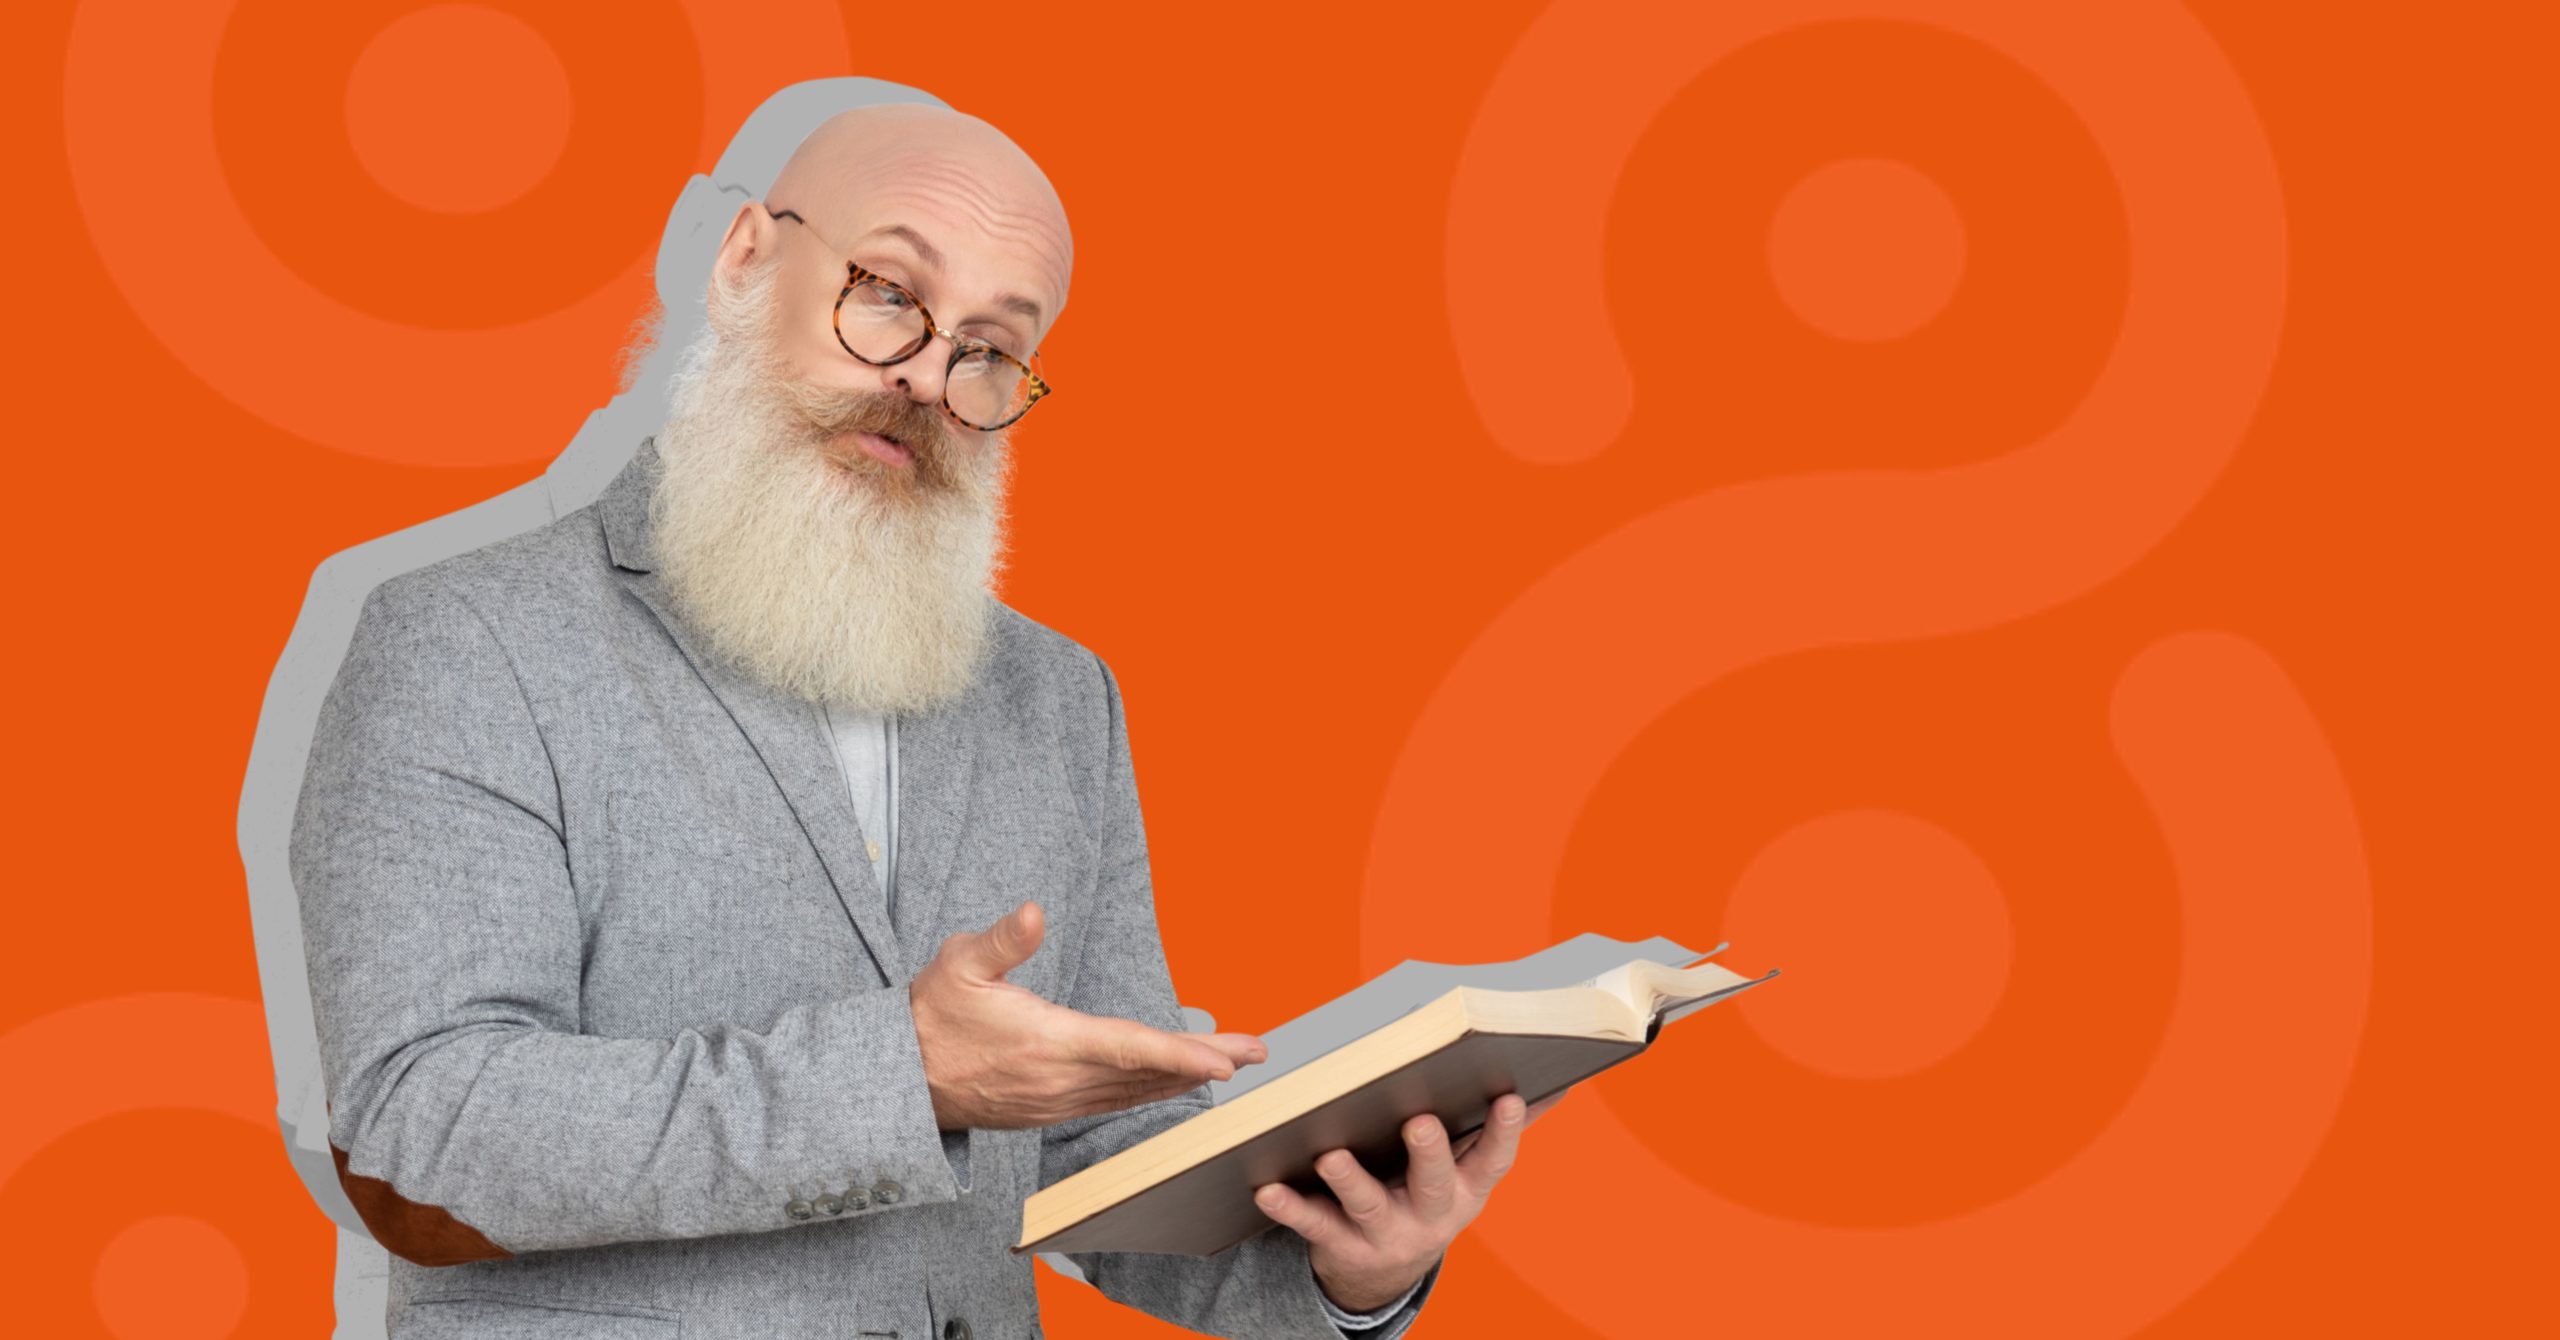 Smart man with beard and glasses looking at book